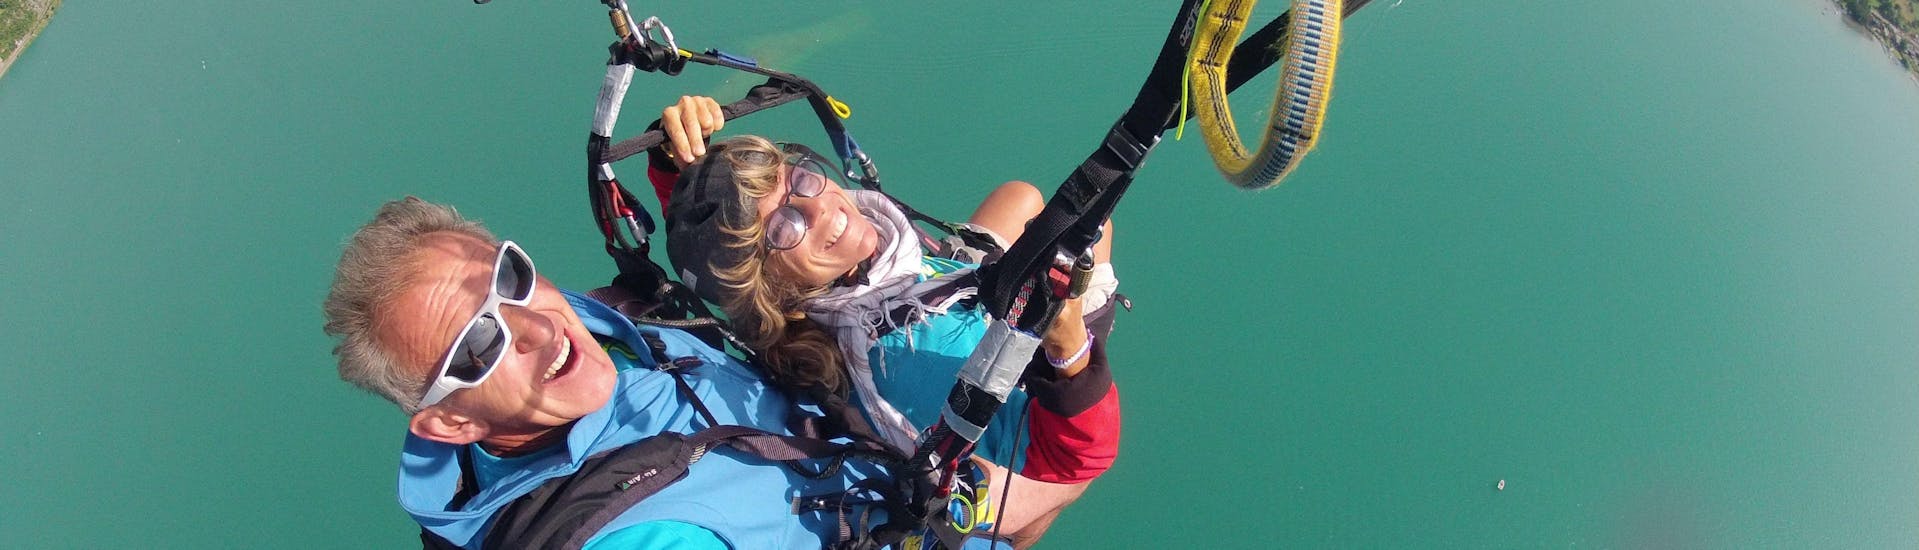 A woman is enjoying her Tandem Paragliding at Lake Annecy - Optimum activity with FBI Parapente.